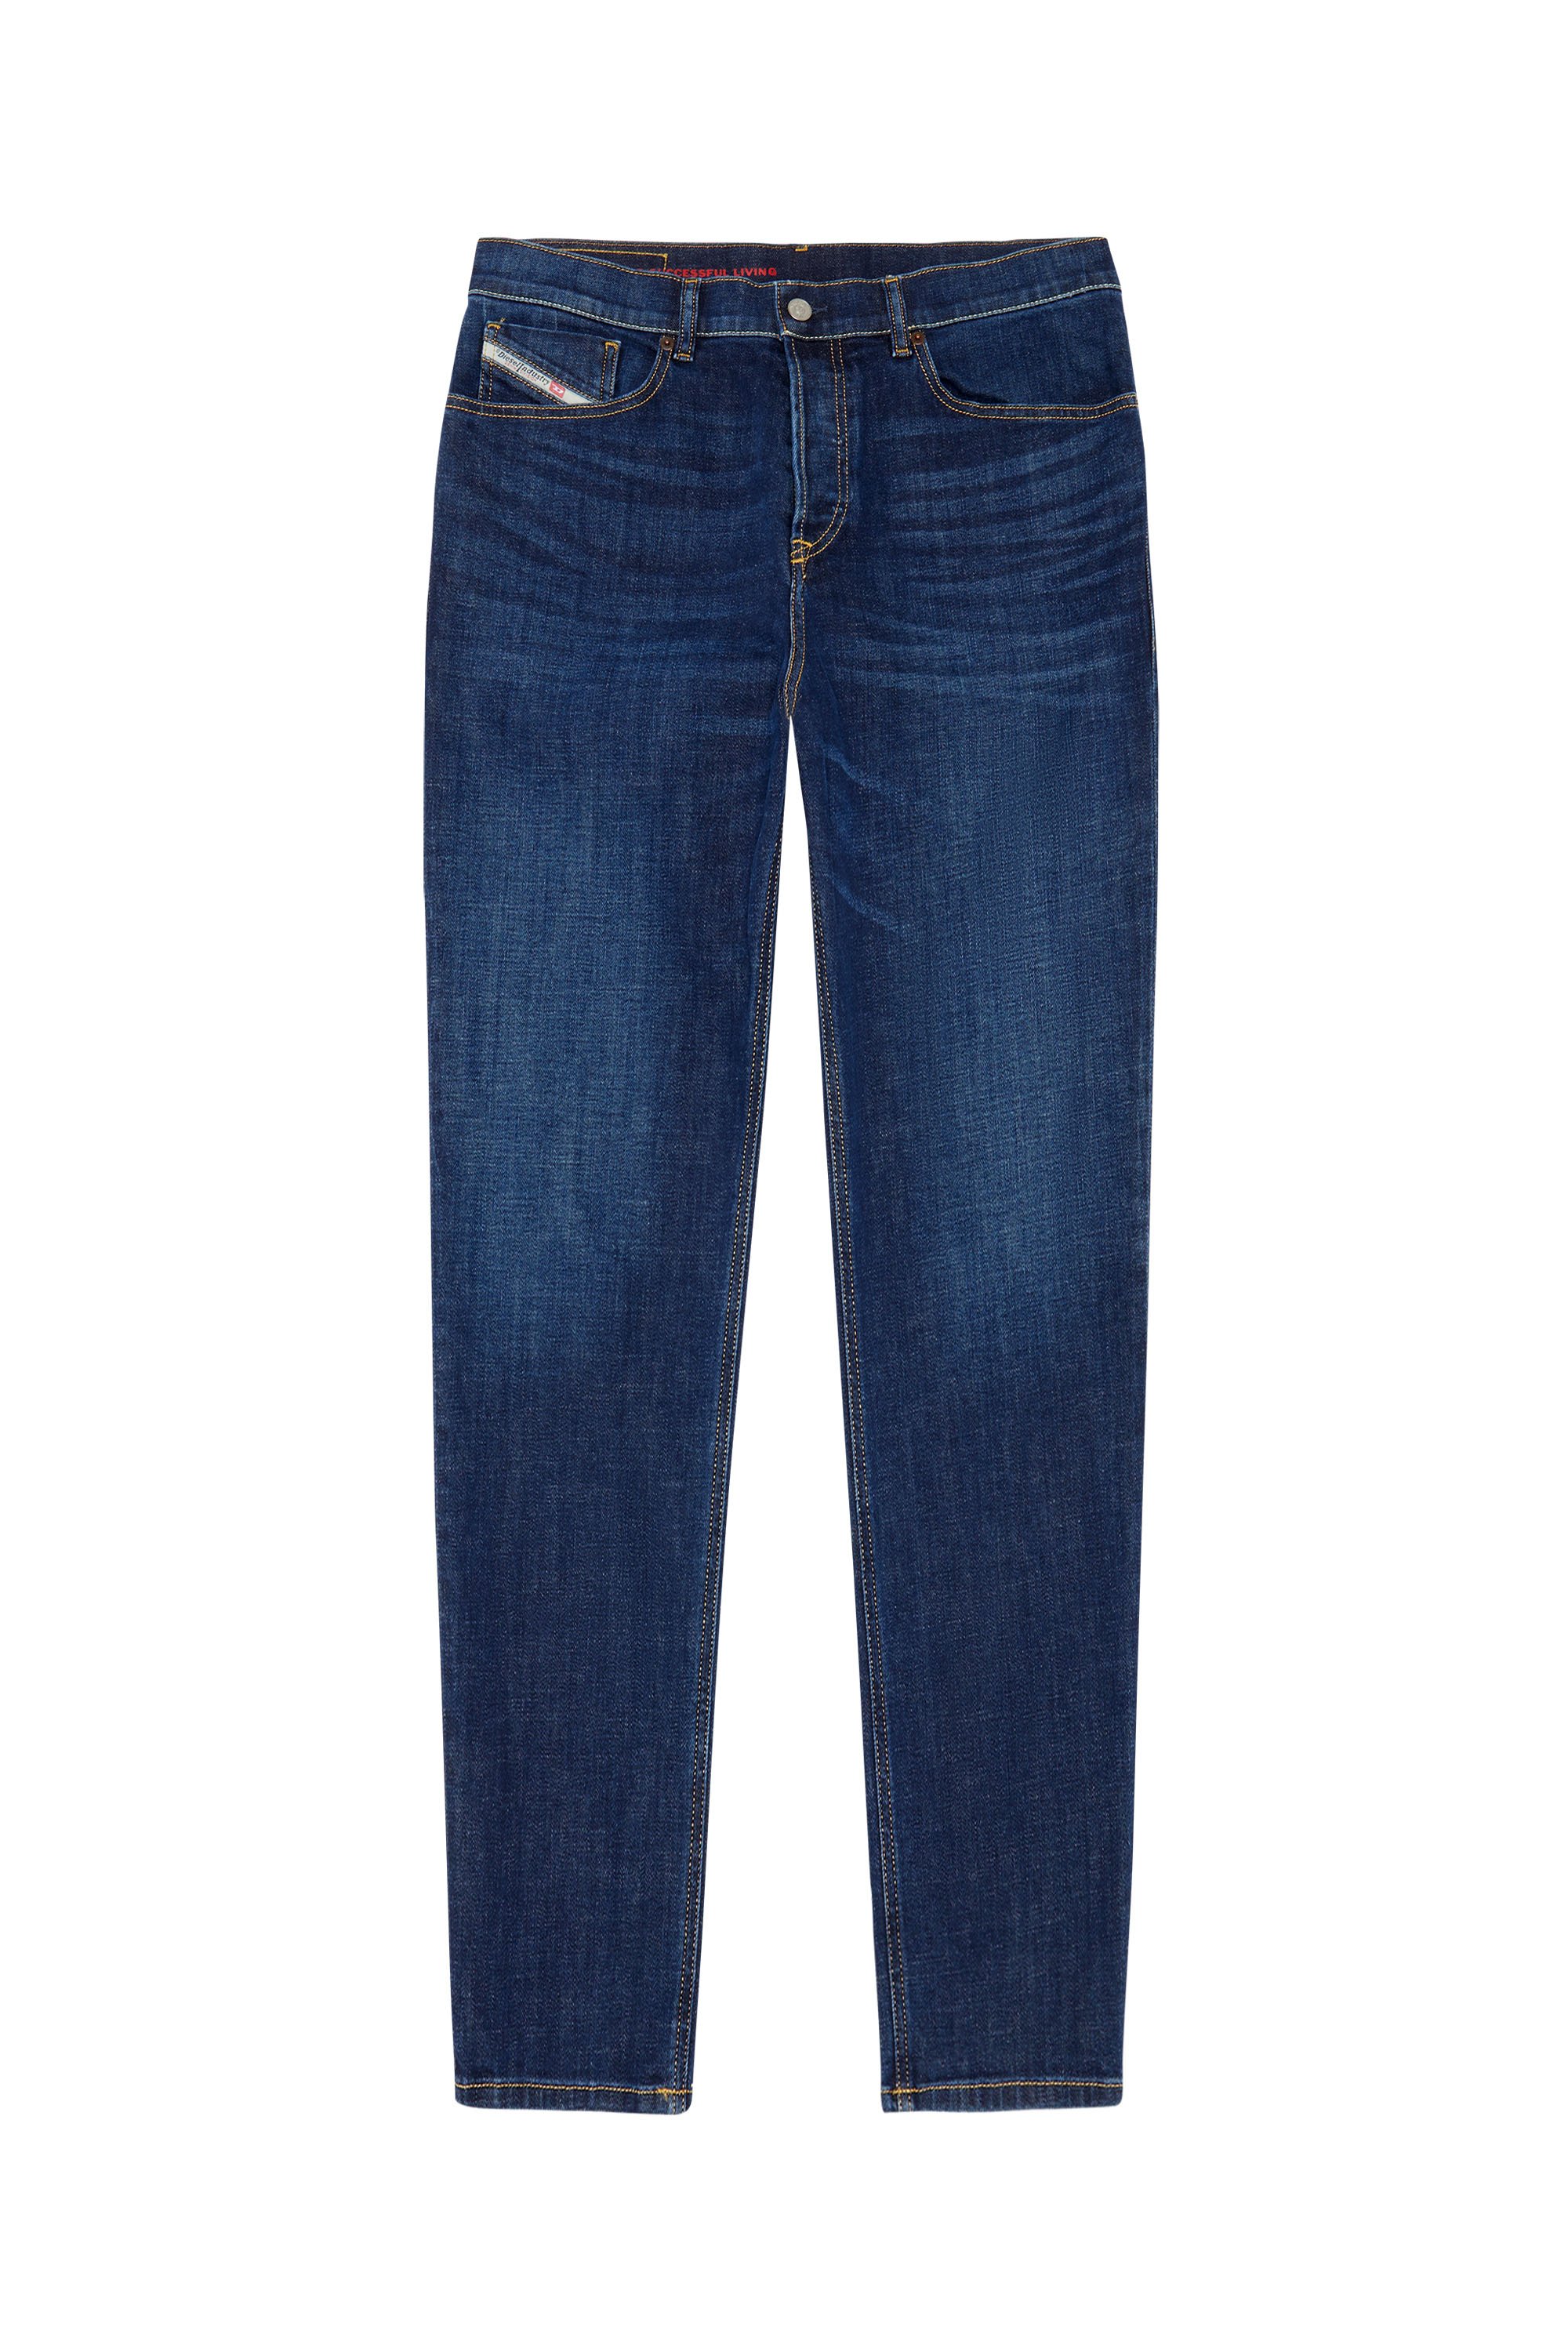 2005 D-FINING 09B90 Tapered Jeans, Dunkelblau - Jeans